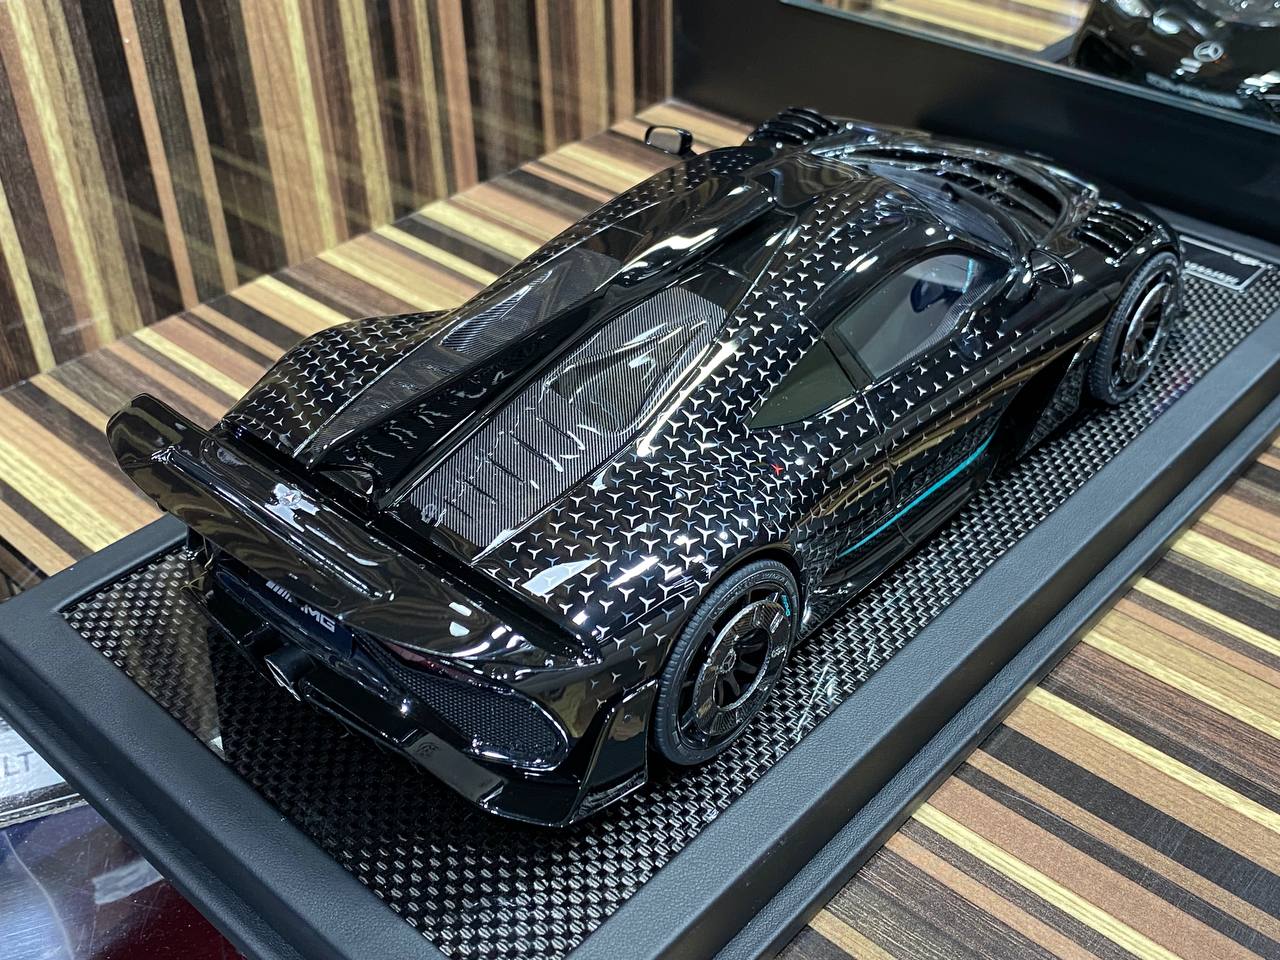 1/18 Resin Mercedes-Benz AMG ONE Black by VIP Models